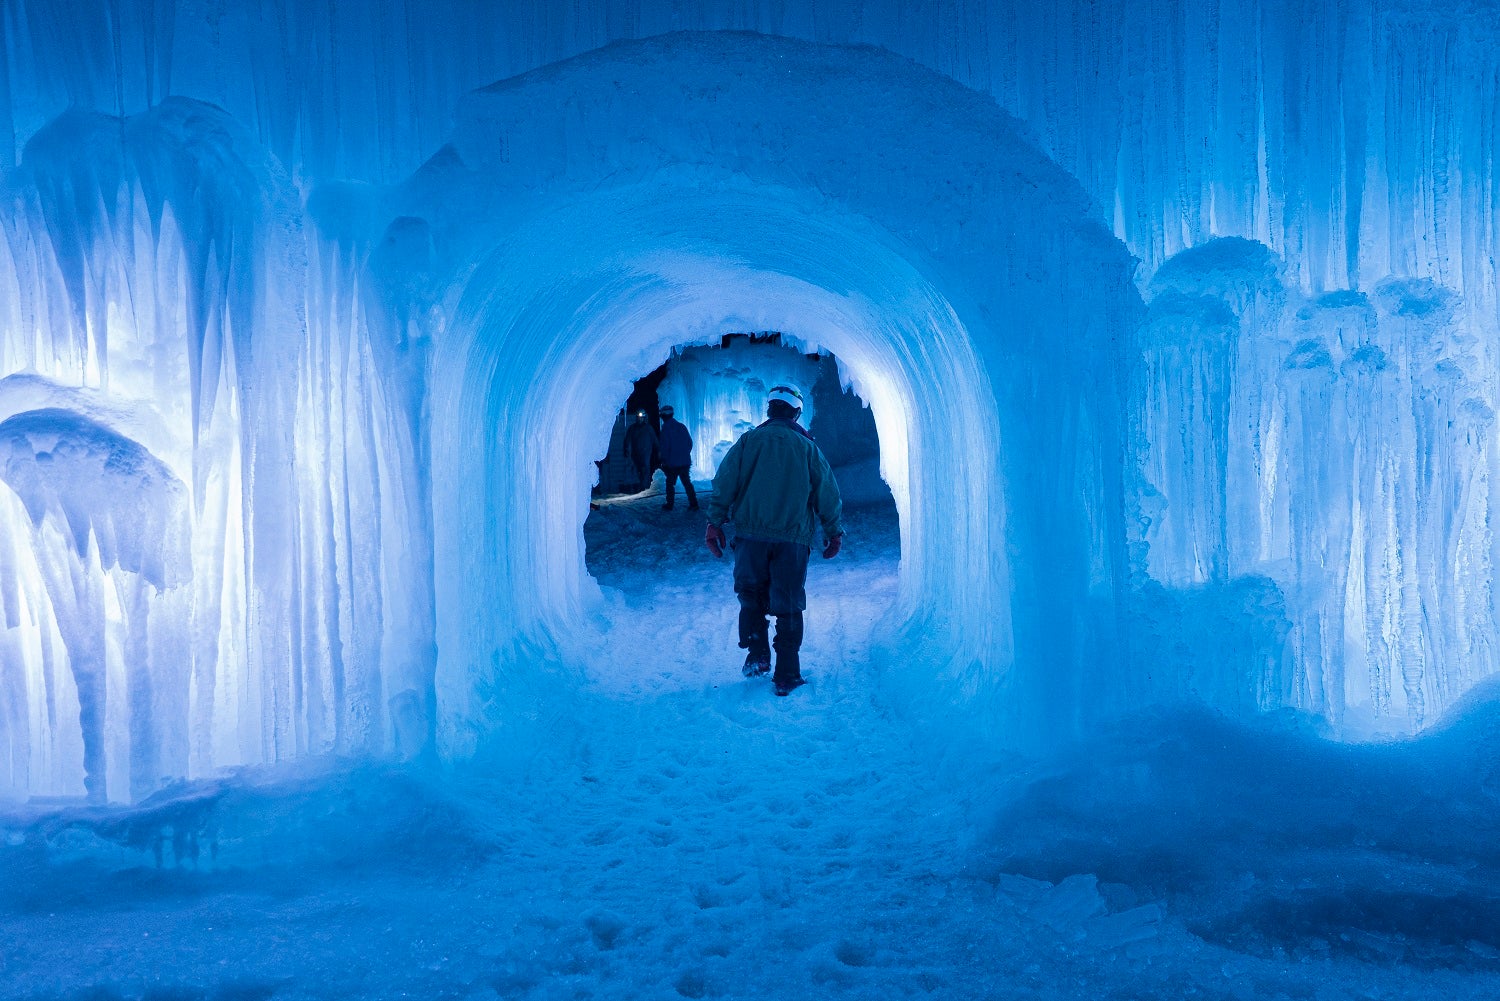 New Hampshire's Ice Castles are back, and they look magical